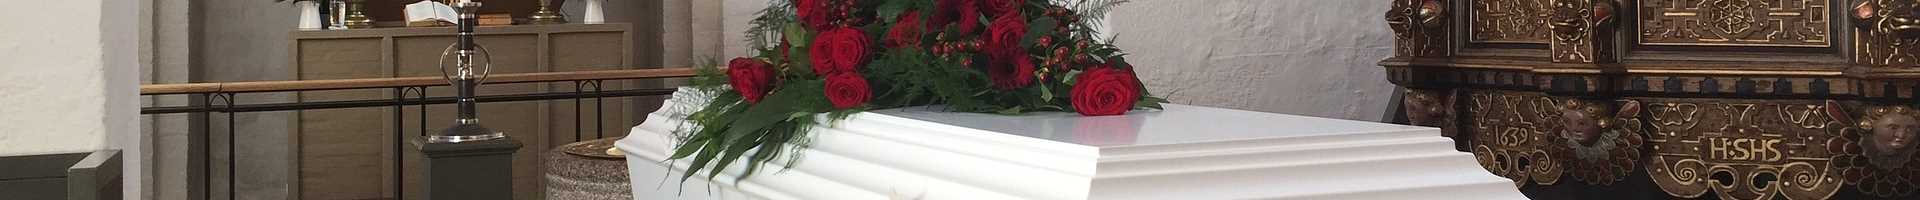 Casket with Roses